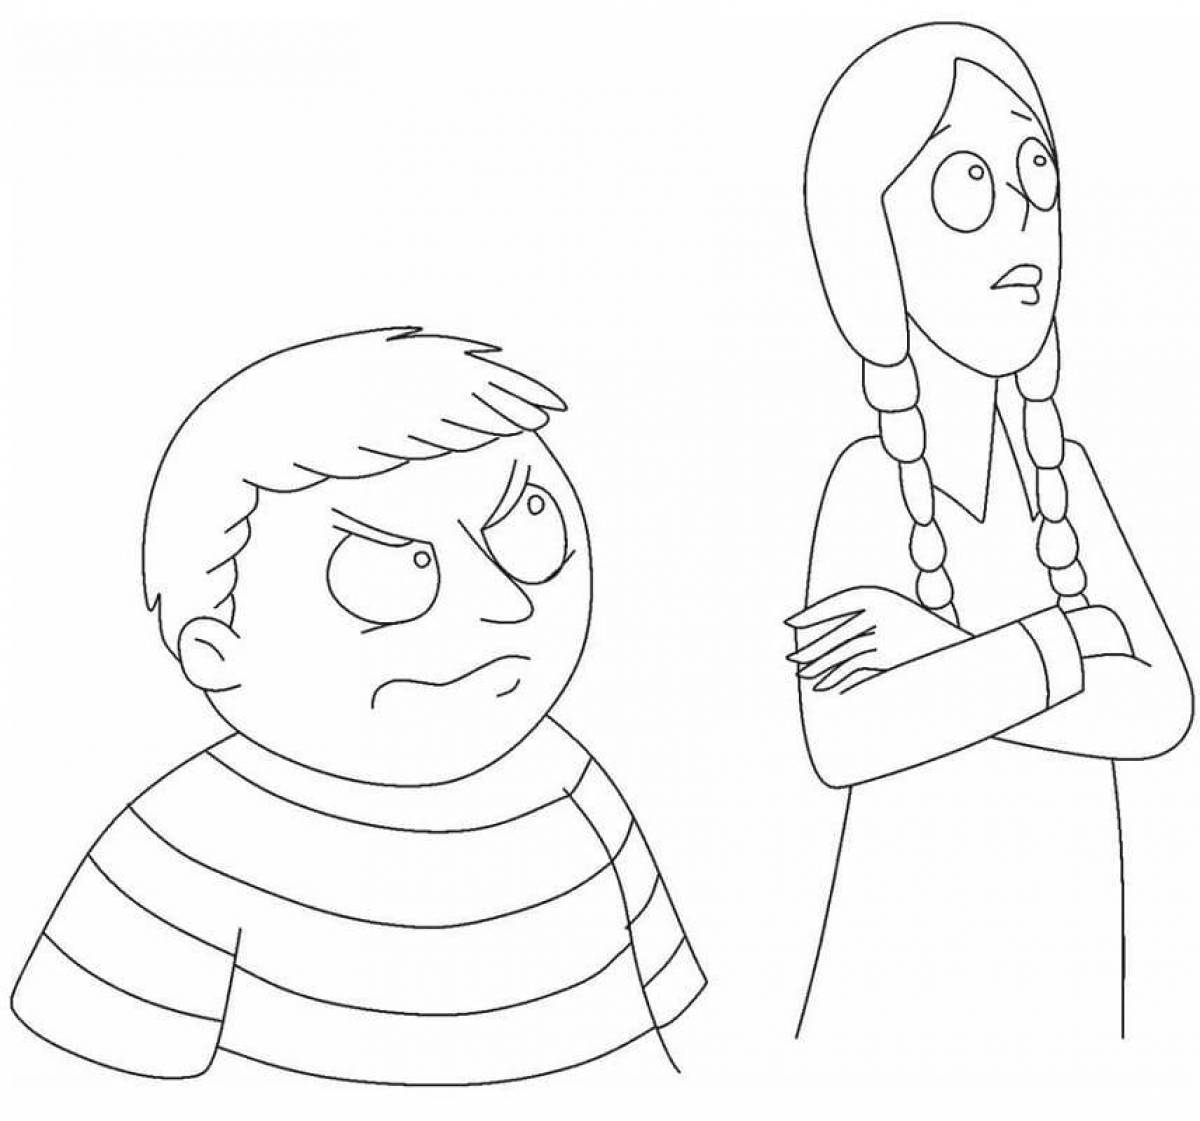 Exciting Addams Family coloring book